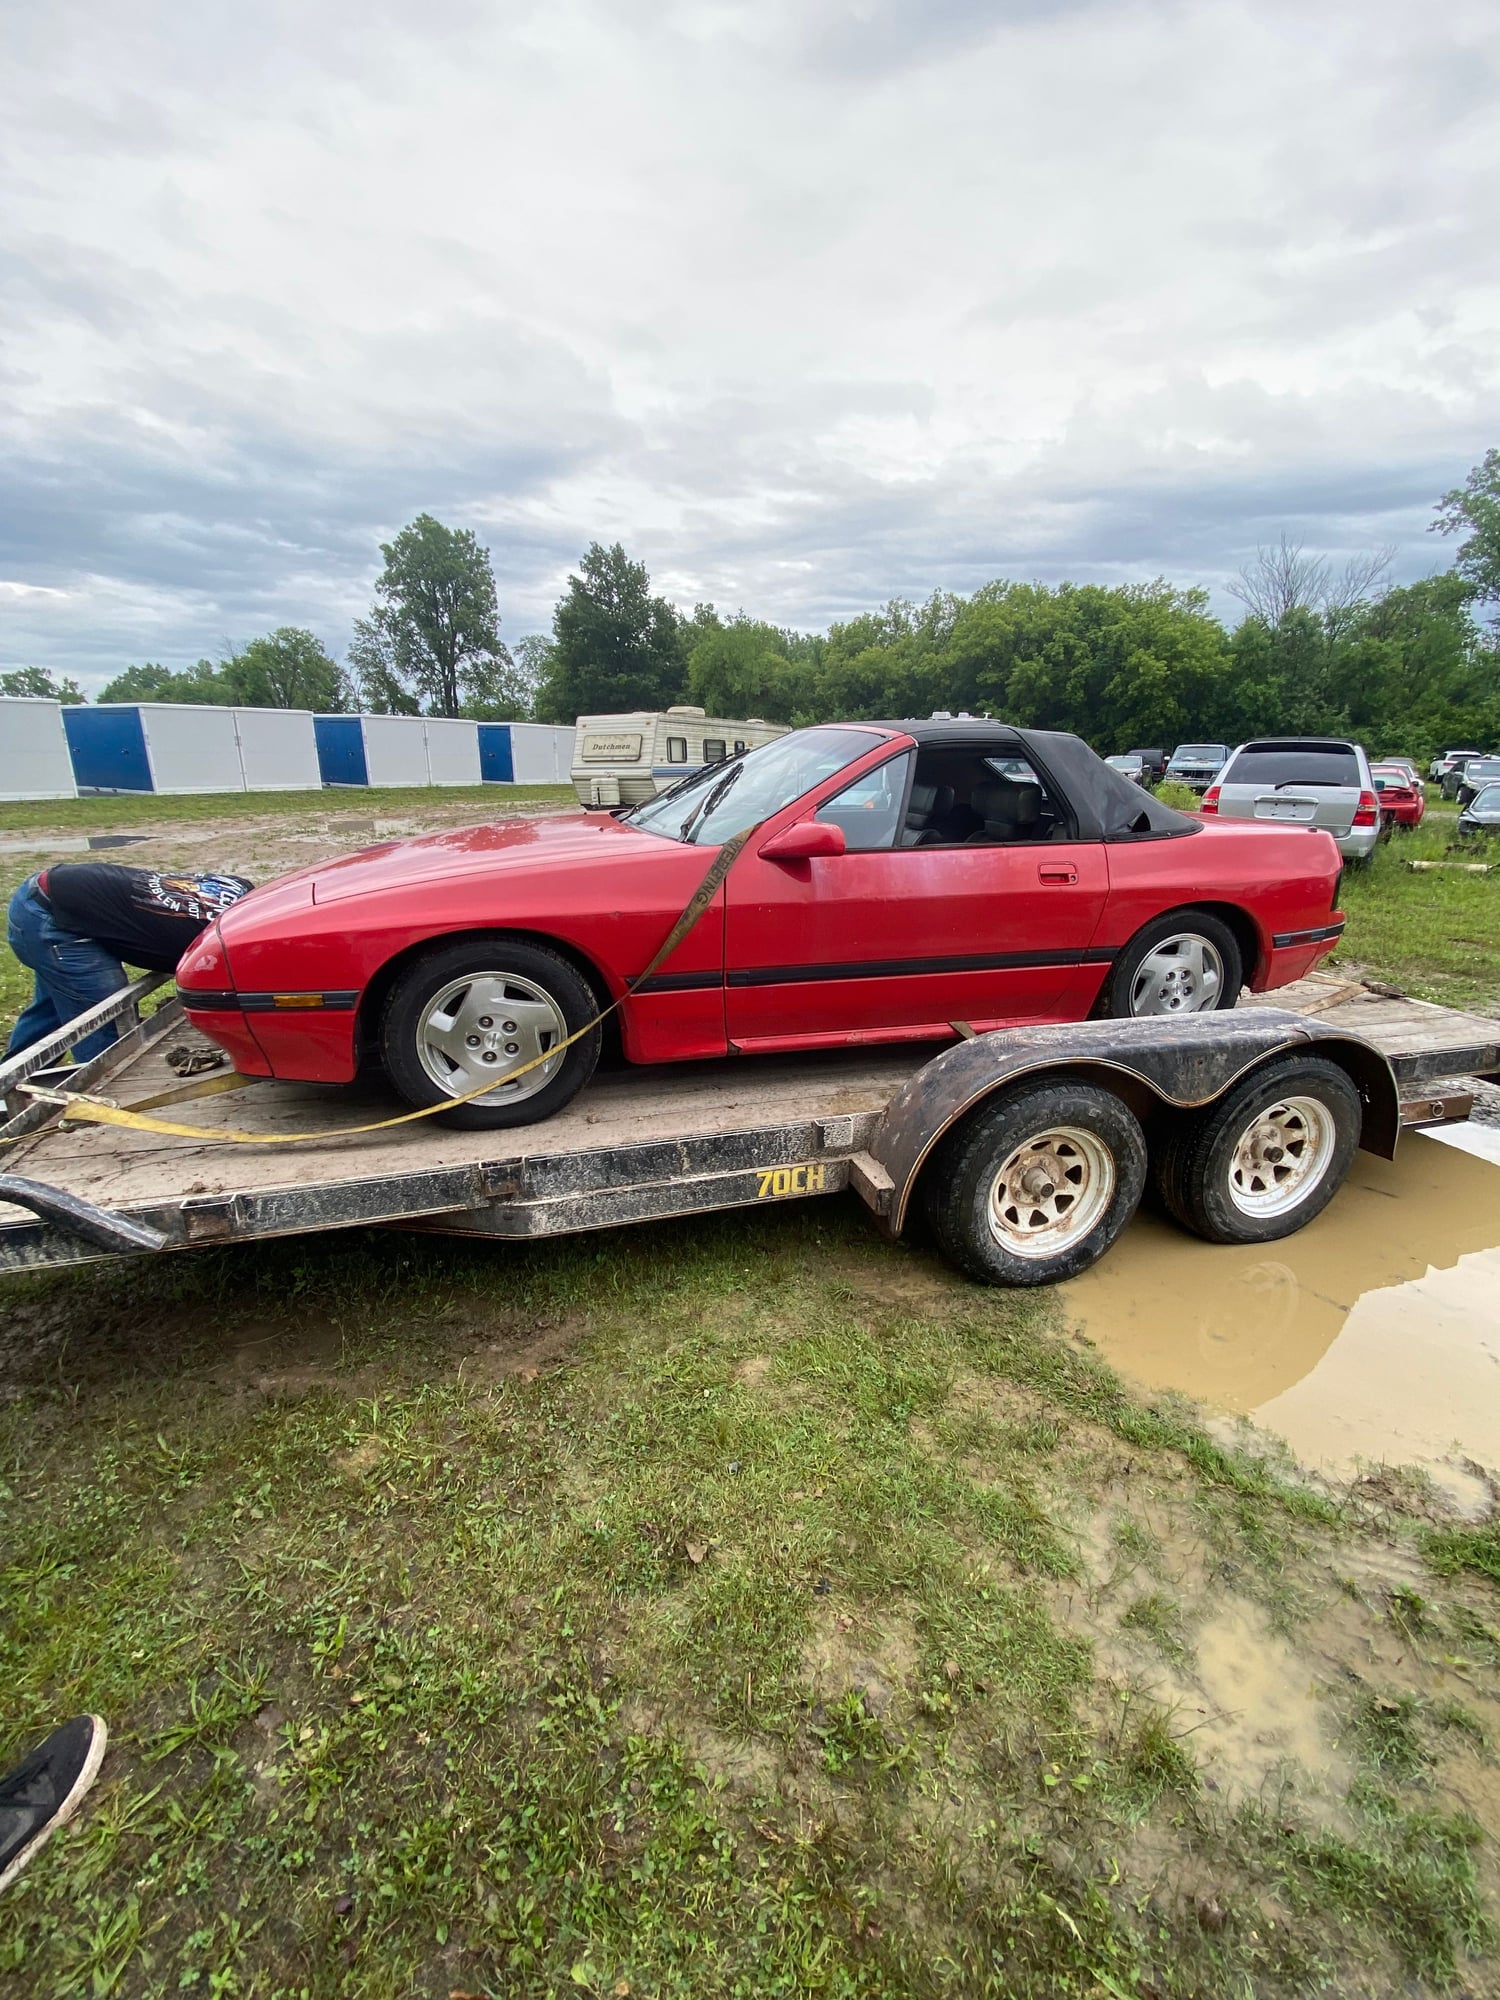 1988 Mazda RX-7 - 1988 RX-7 Vert - Used - VIN JM1FC3518J0101566 - 99,000 Miles - Other - 2WD - Manual - Convertible - Red - Milford, MI 48381, United States